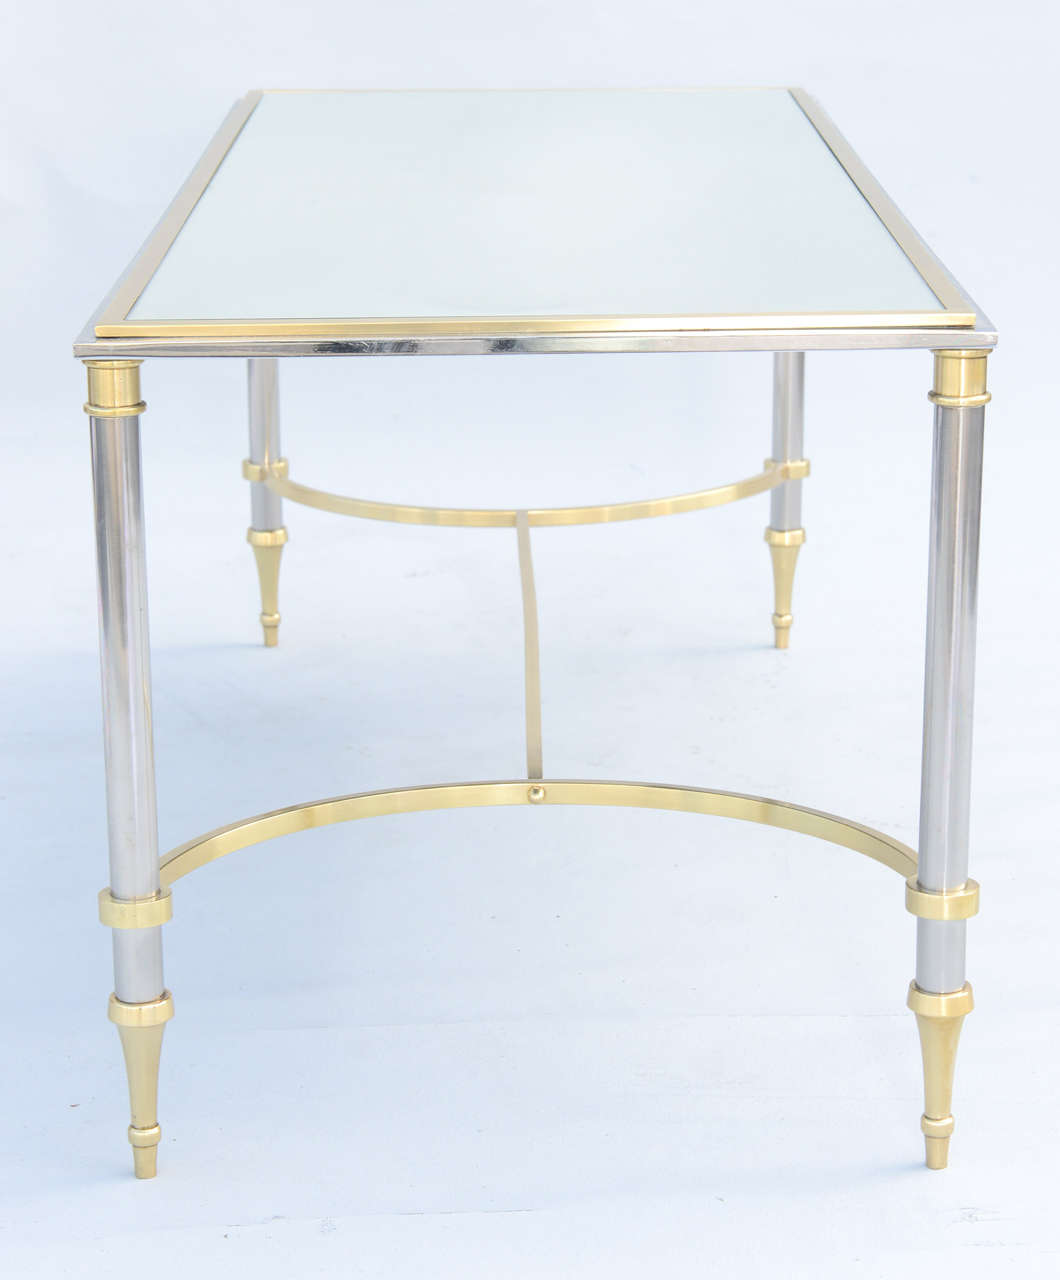 Brass Jansen Style Coffee Table with Mirrored Top